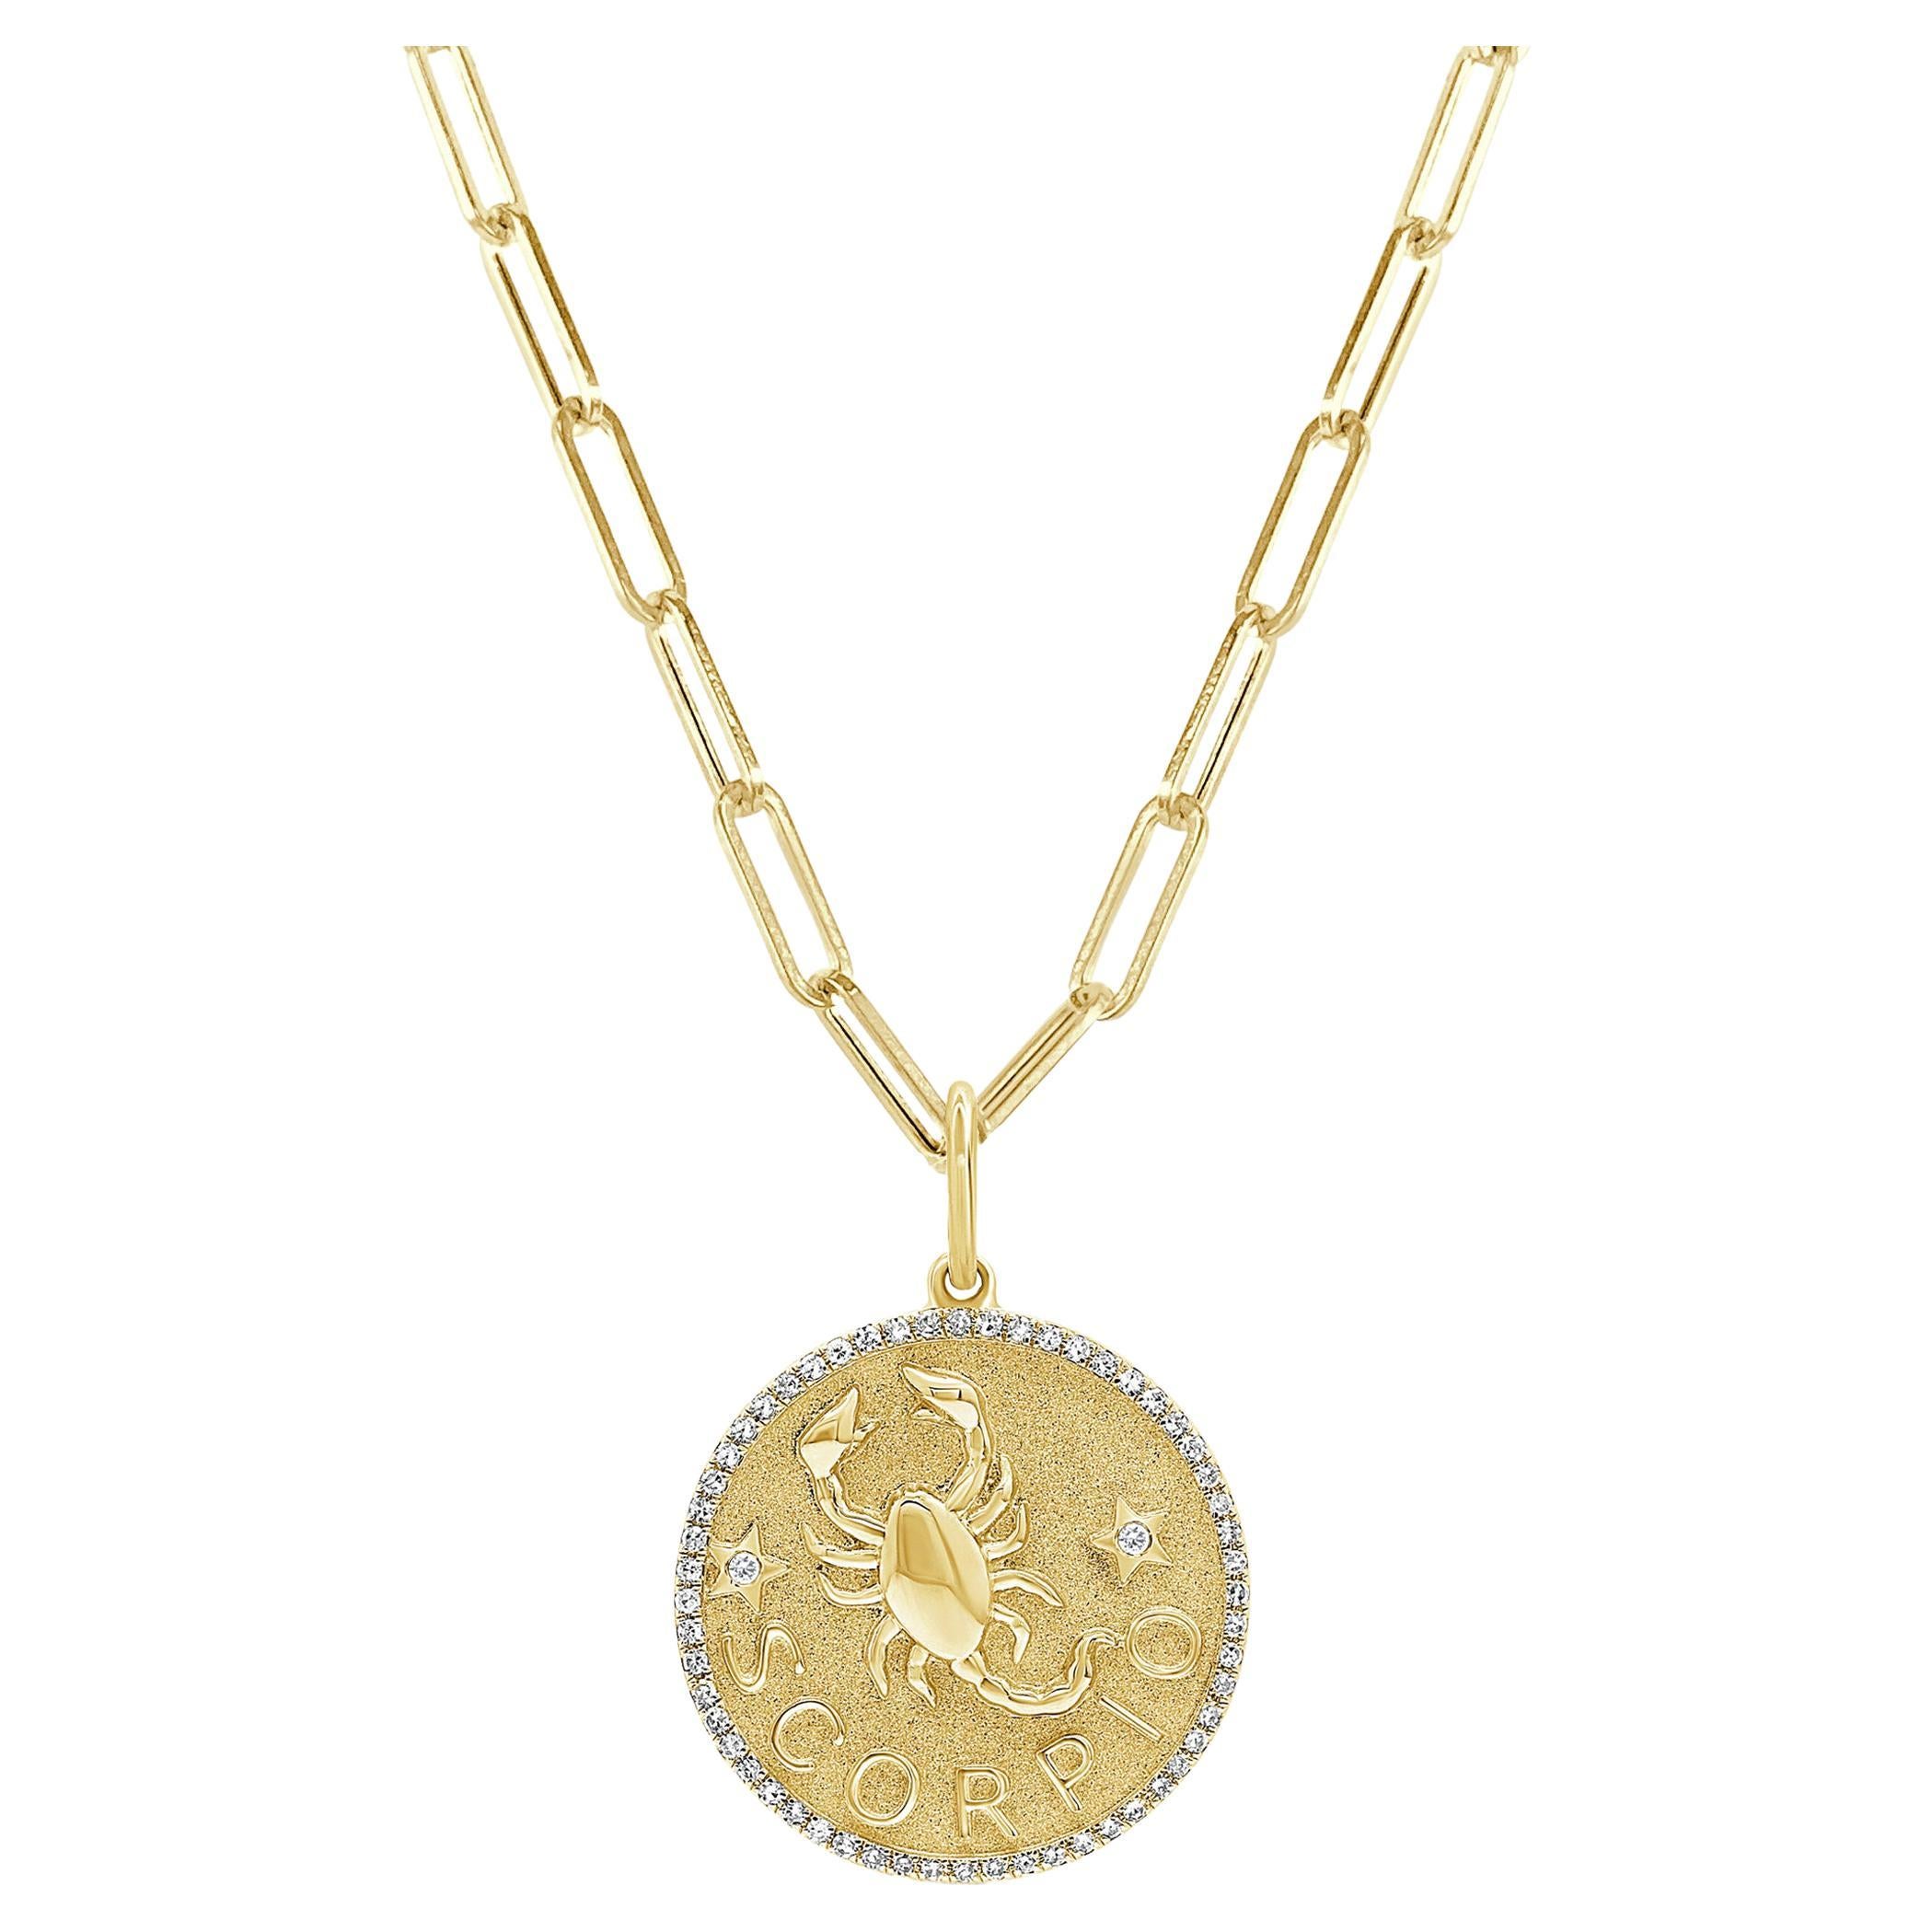 Zodiac Diamond Necklace 14K Yellow Gold 1/5 CT TDW Gifts for Her, Scorpio